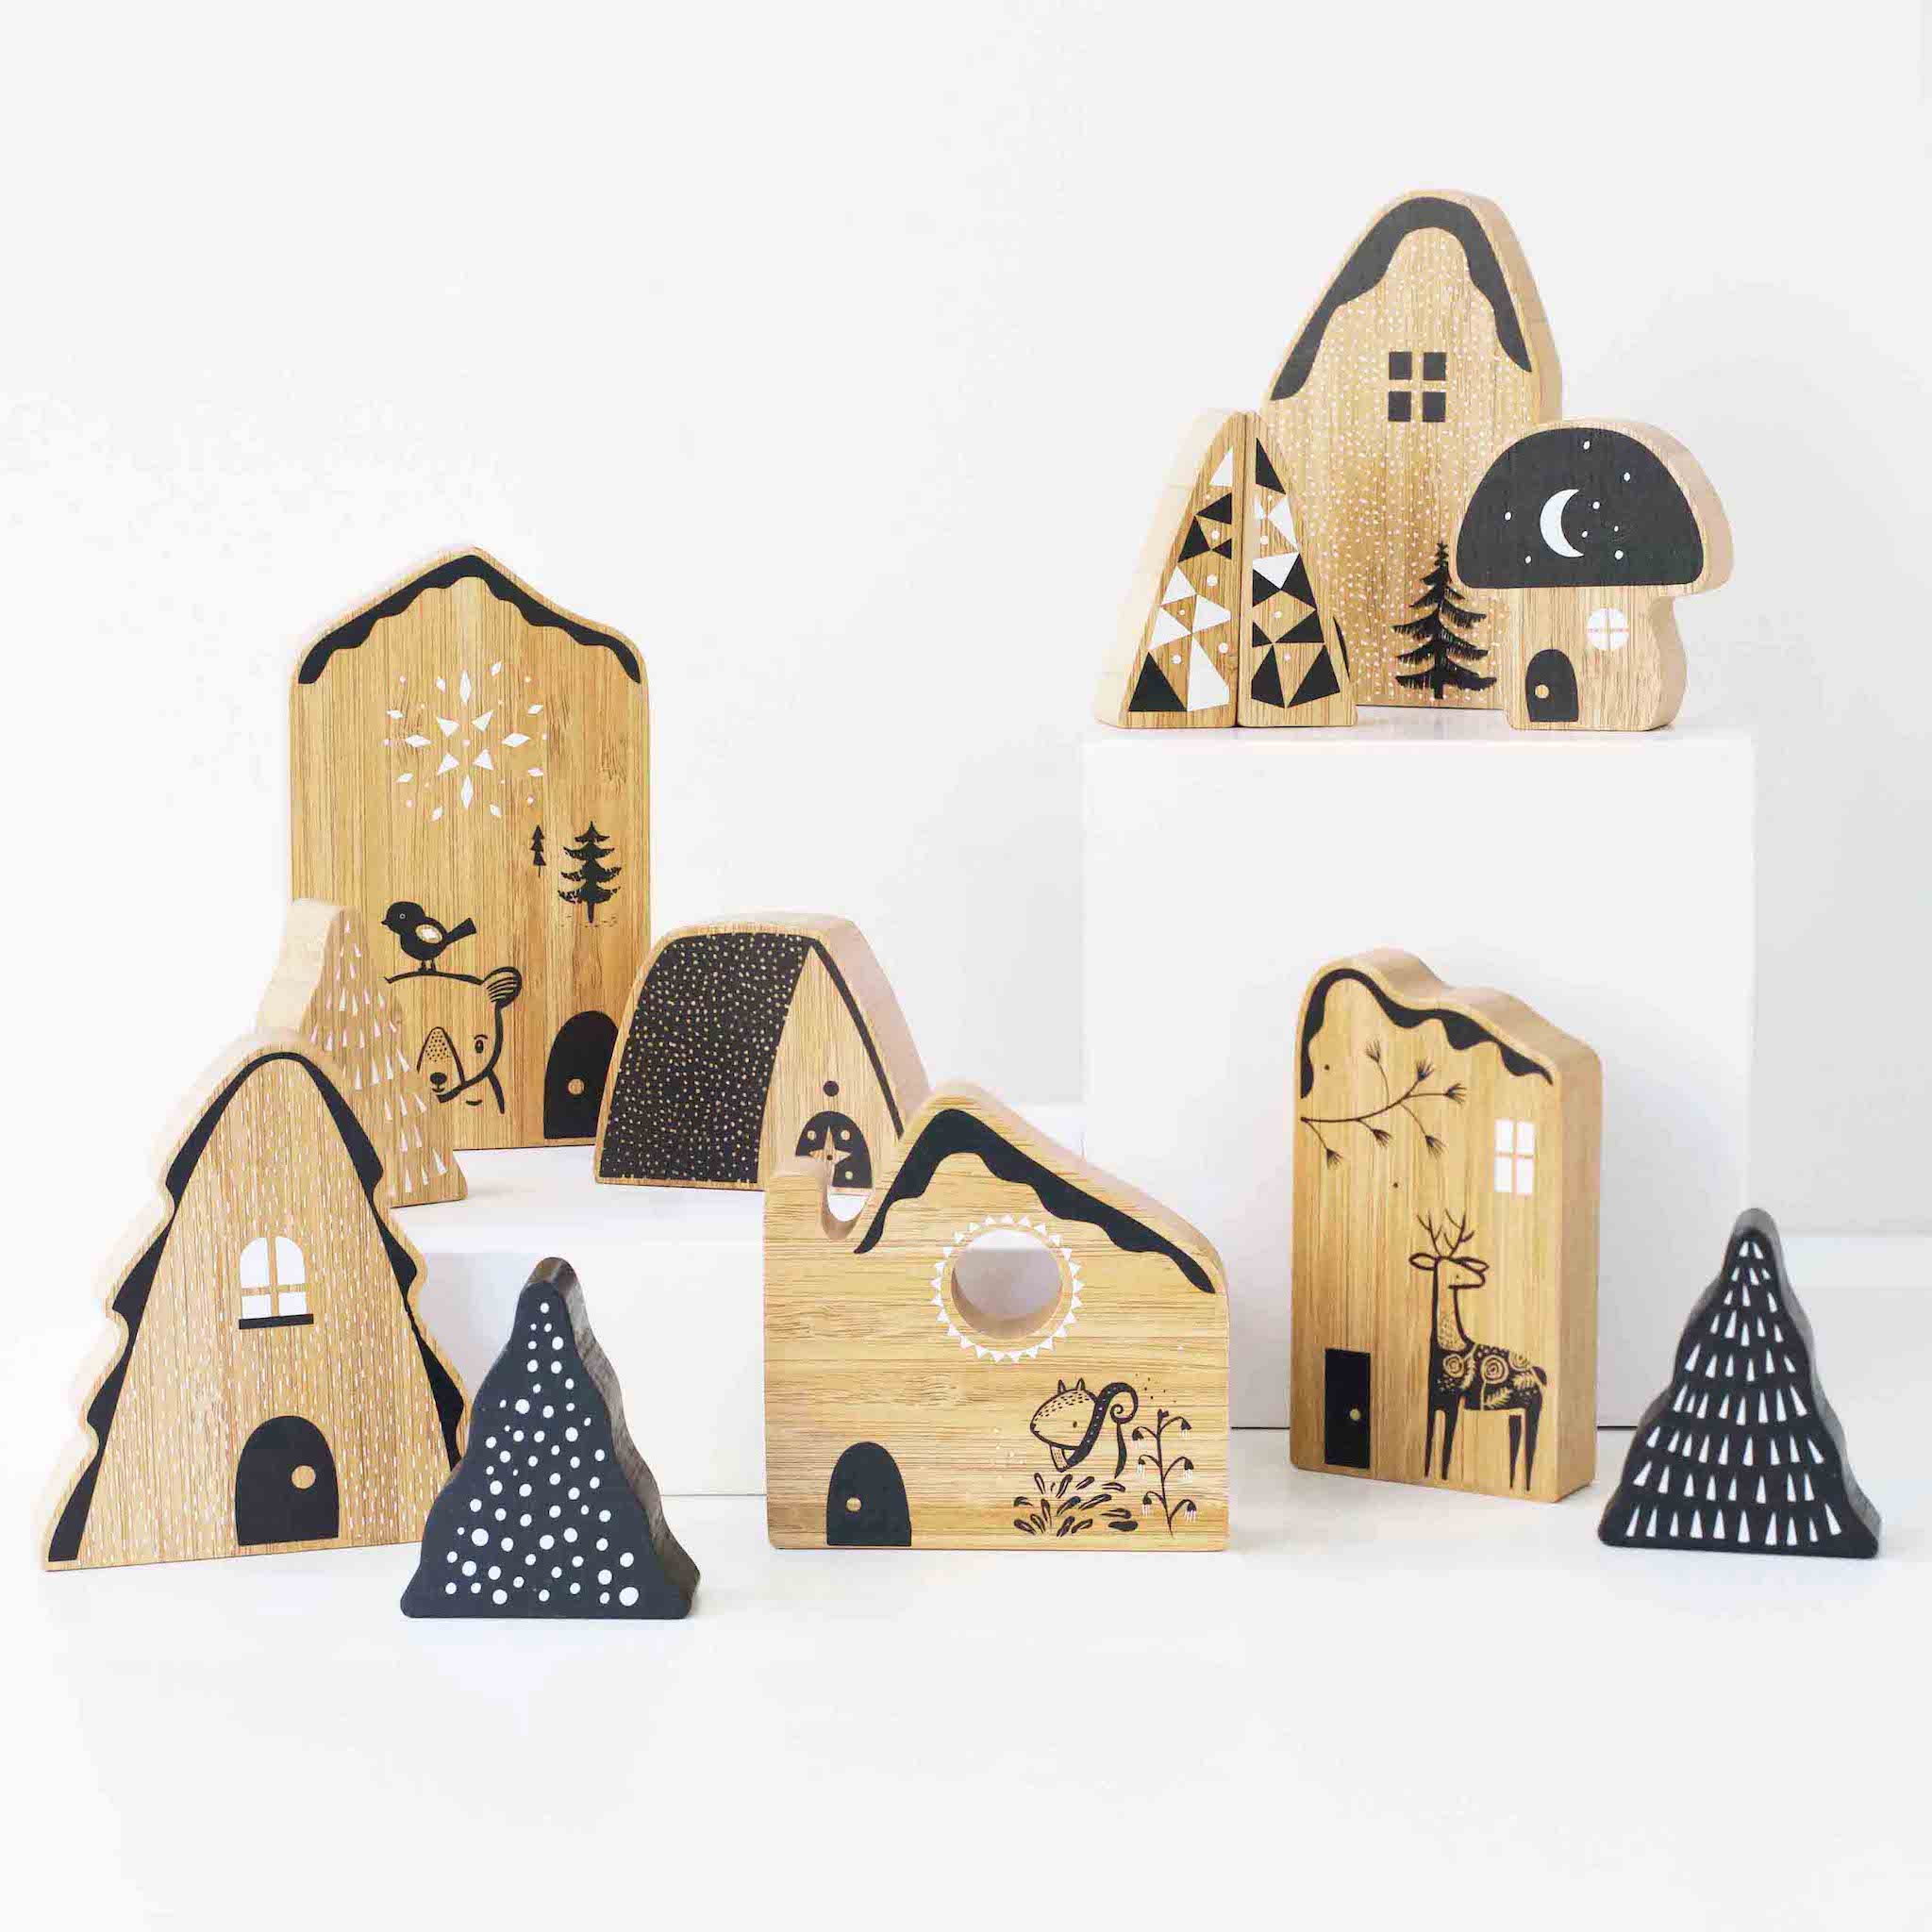 woodland-village-wooden-house-and-trees-blocks-toy-decoration-play-set-2.jpg